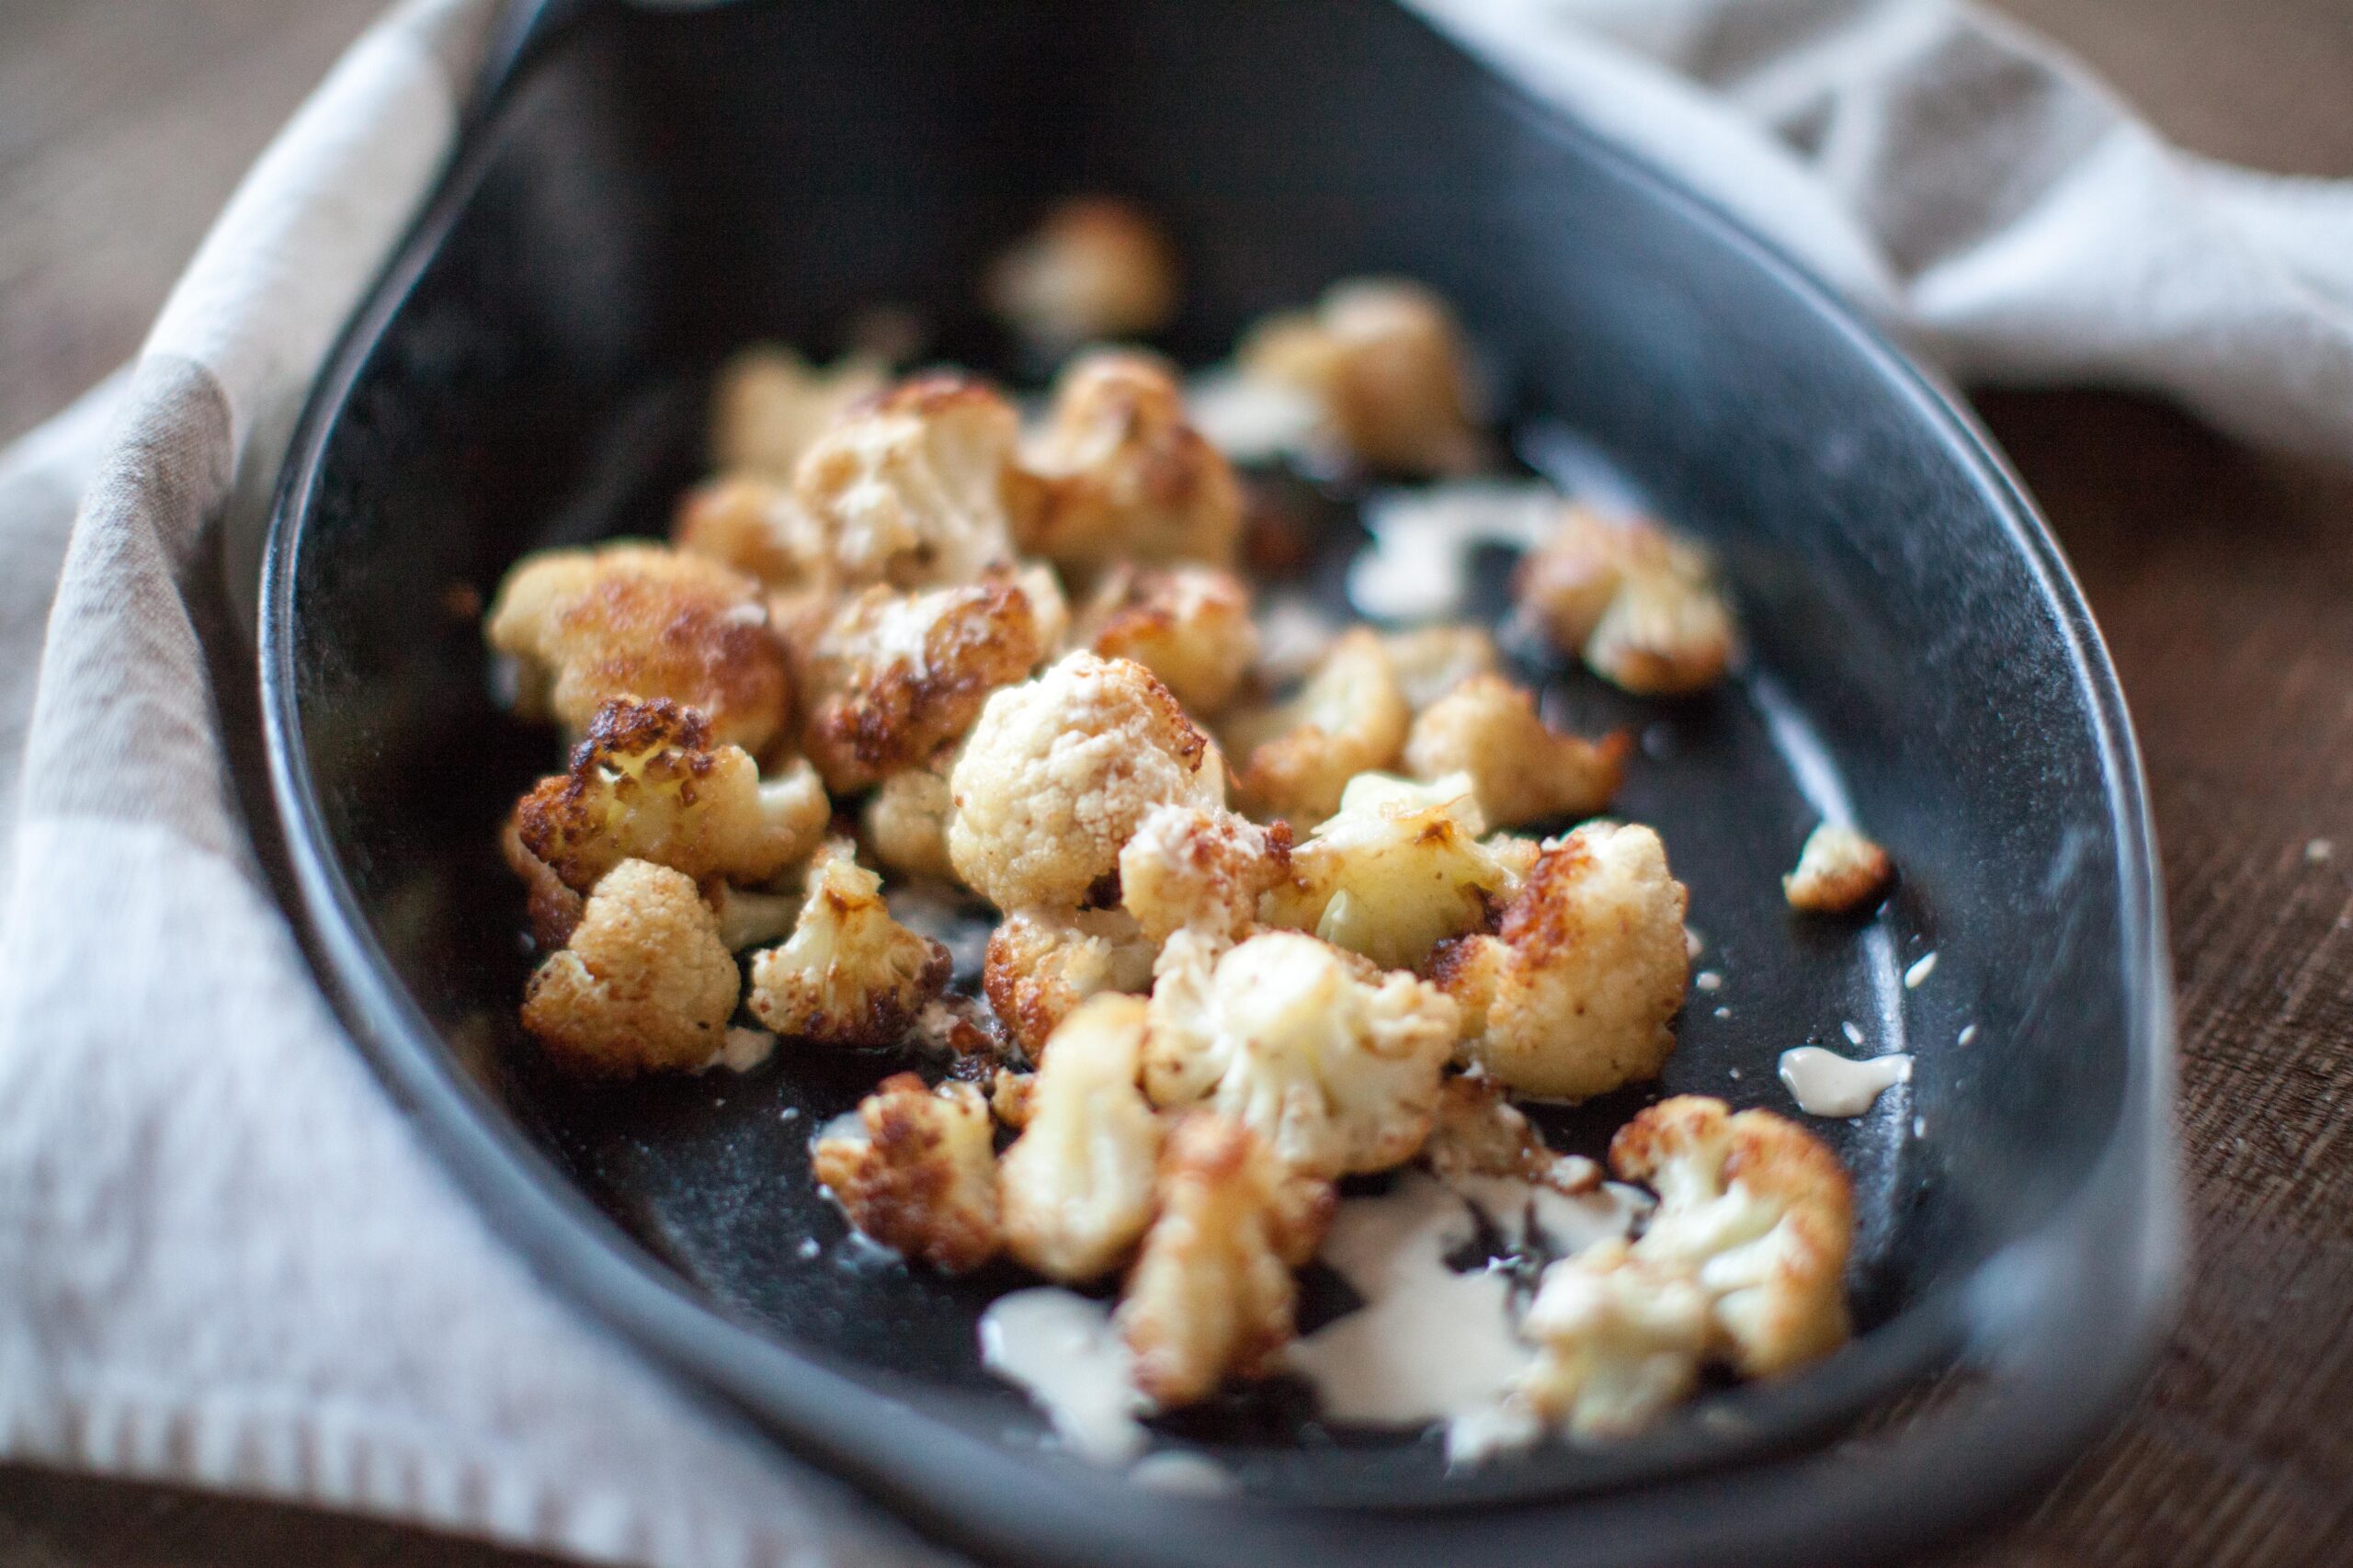 Delight Your Tastebuds with This Exotic Cauliflower Recipe